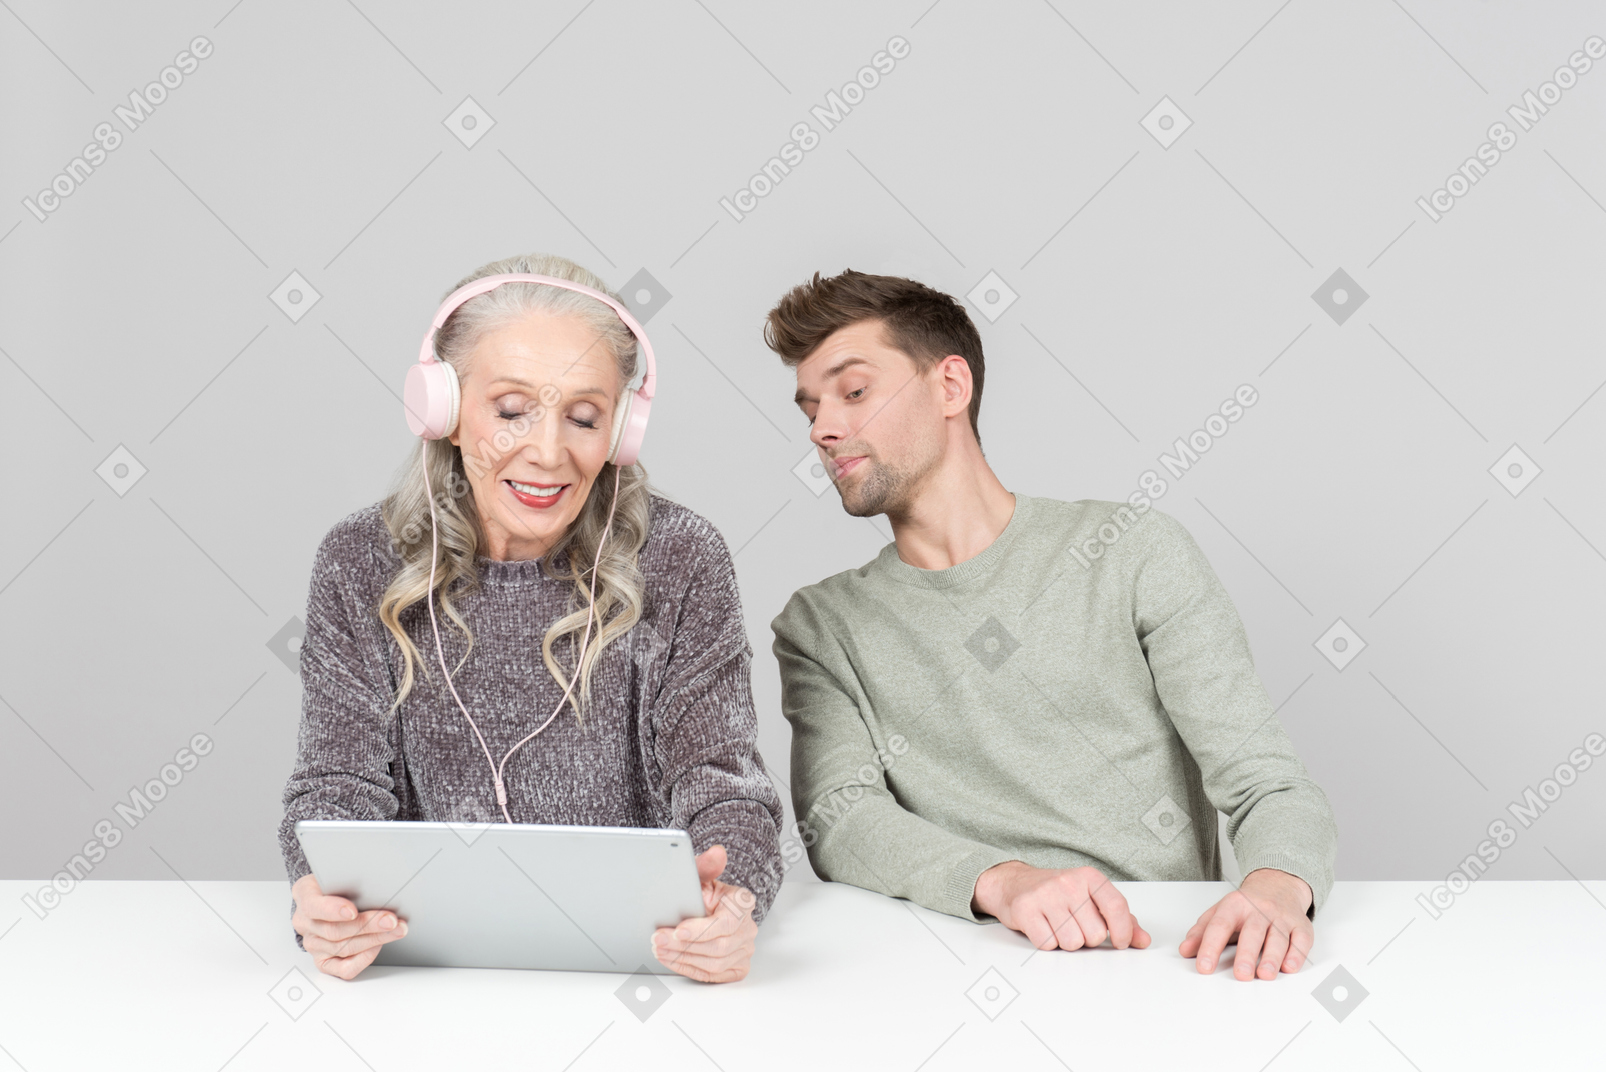 Old woman in headphones and young guy watching something on a digital tablet